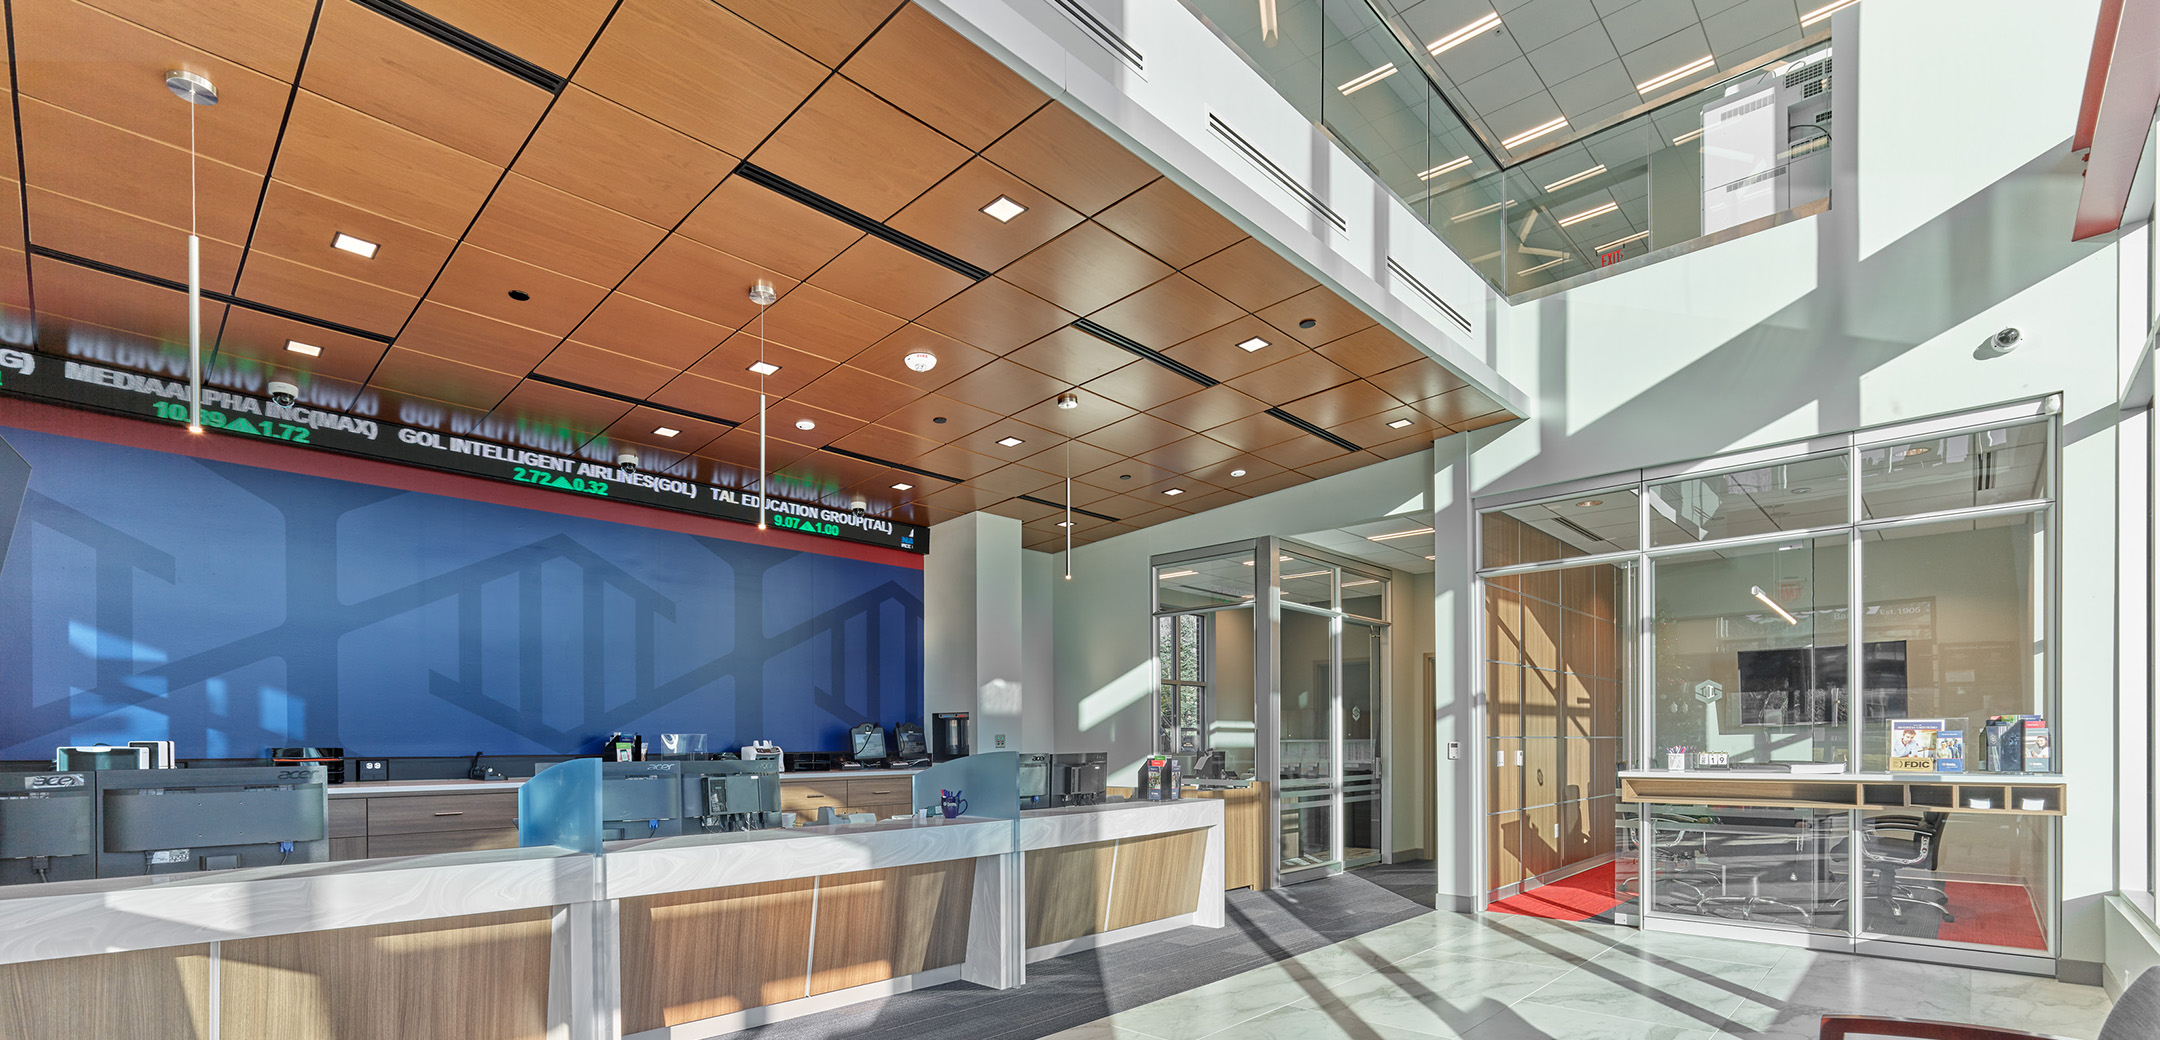 The interior of Peoples Security Bank featuring bright open space, a bank teller area with wood ceilings, and glass surrounding offices